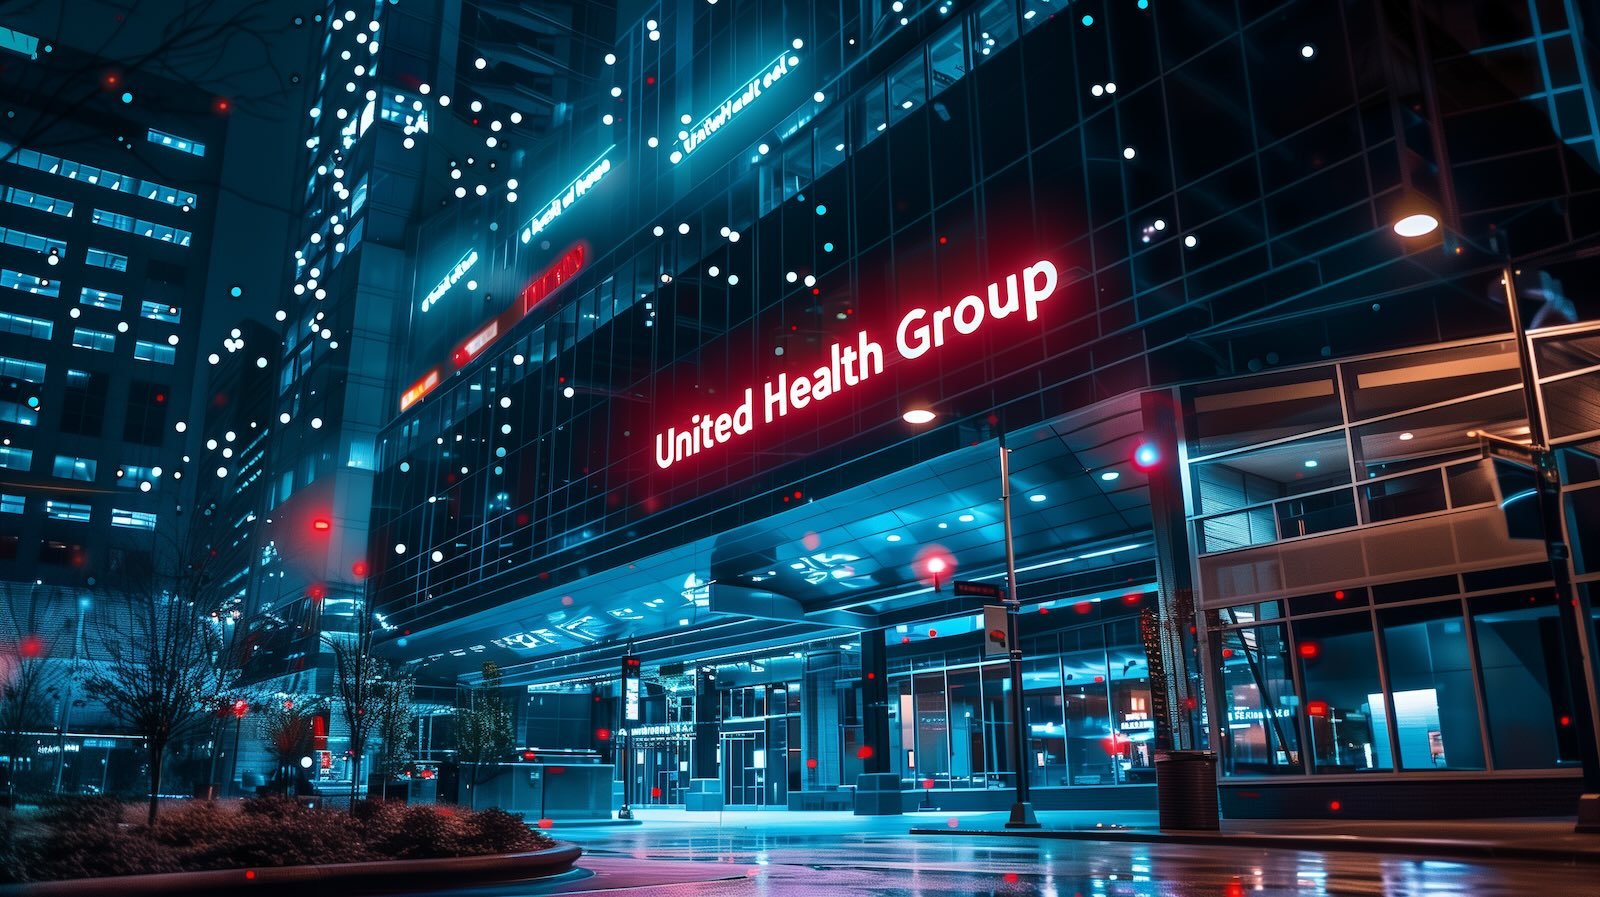 UnitedHealth Group Incident Overview